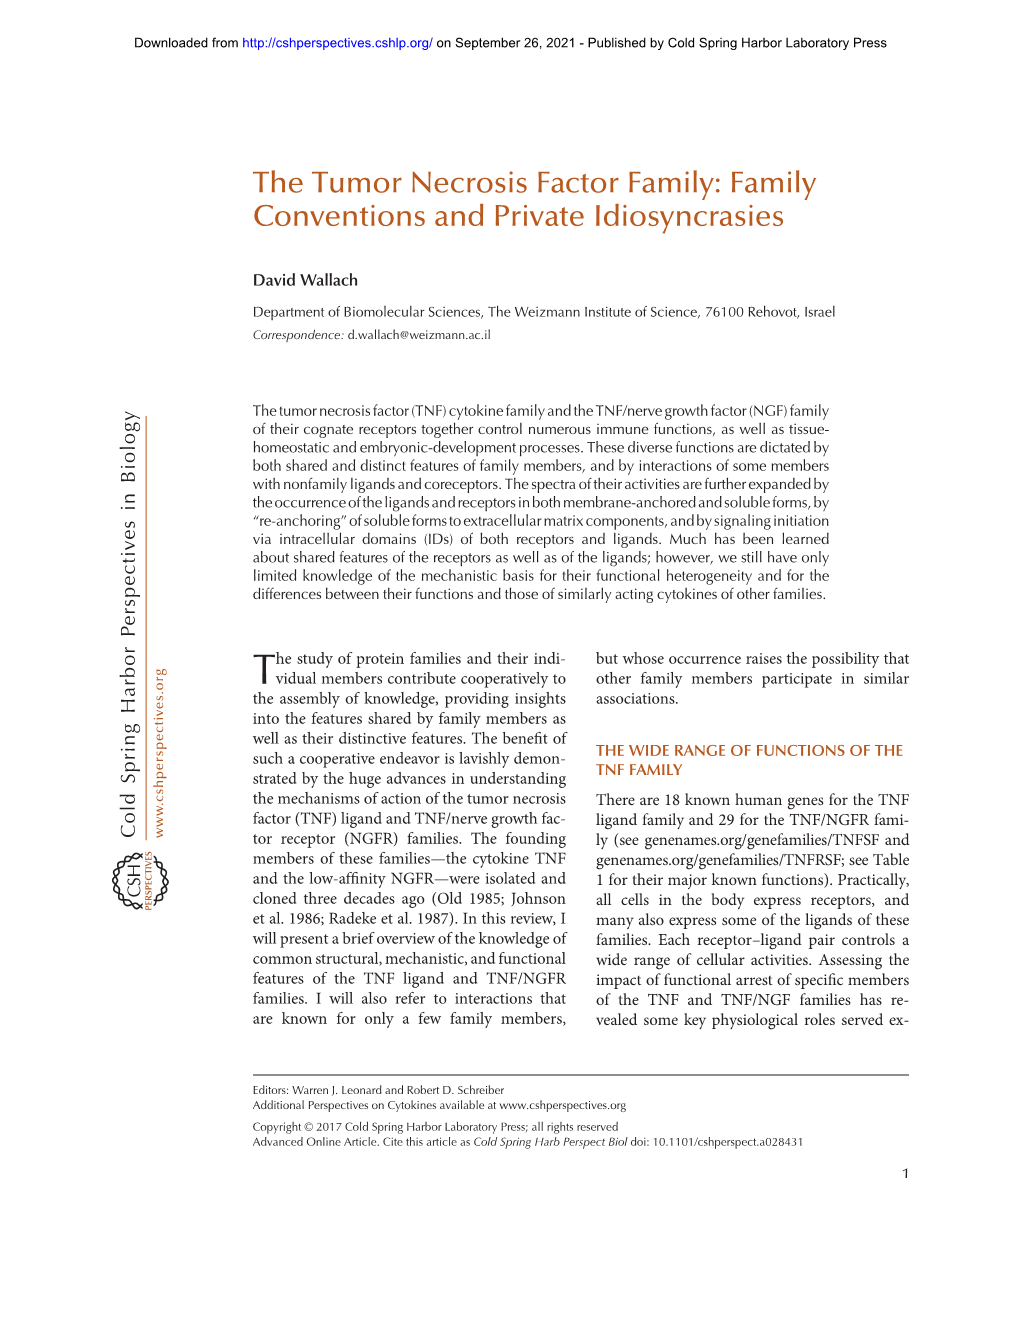 The Tumor Necrosis Factor Family: Family Conventions and Private Idiosyncrasies